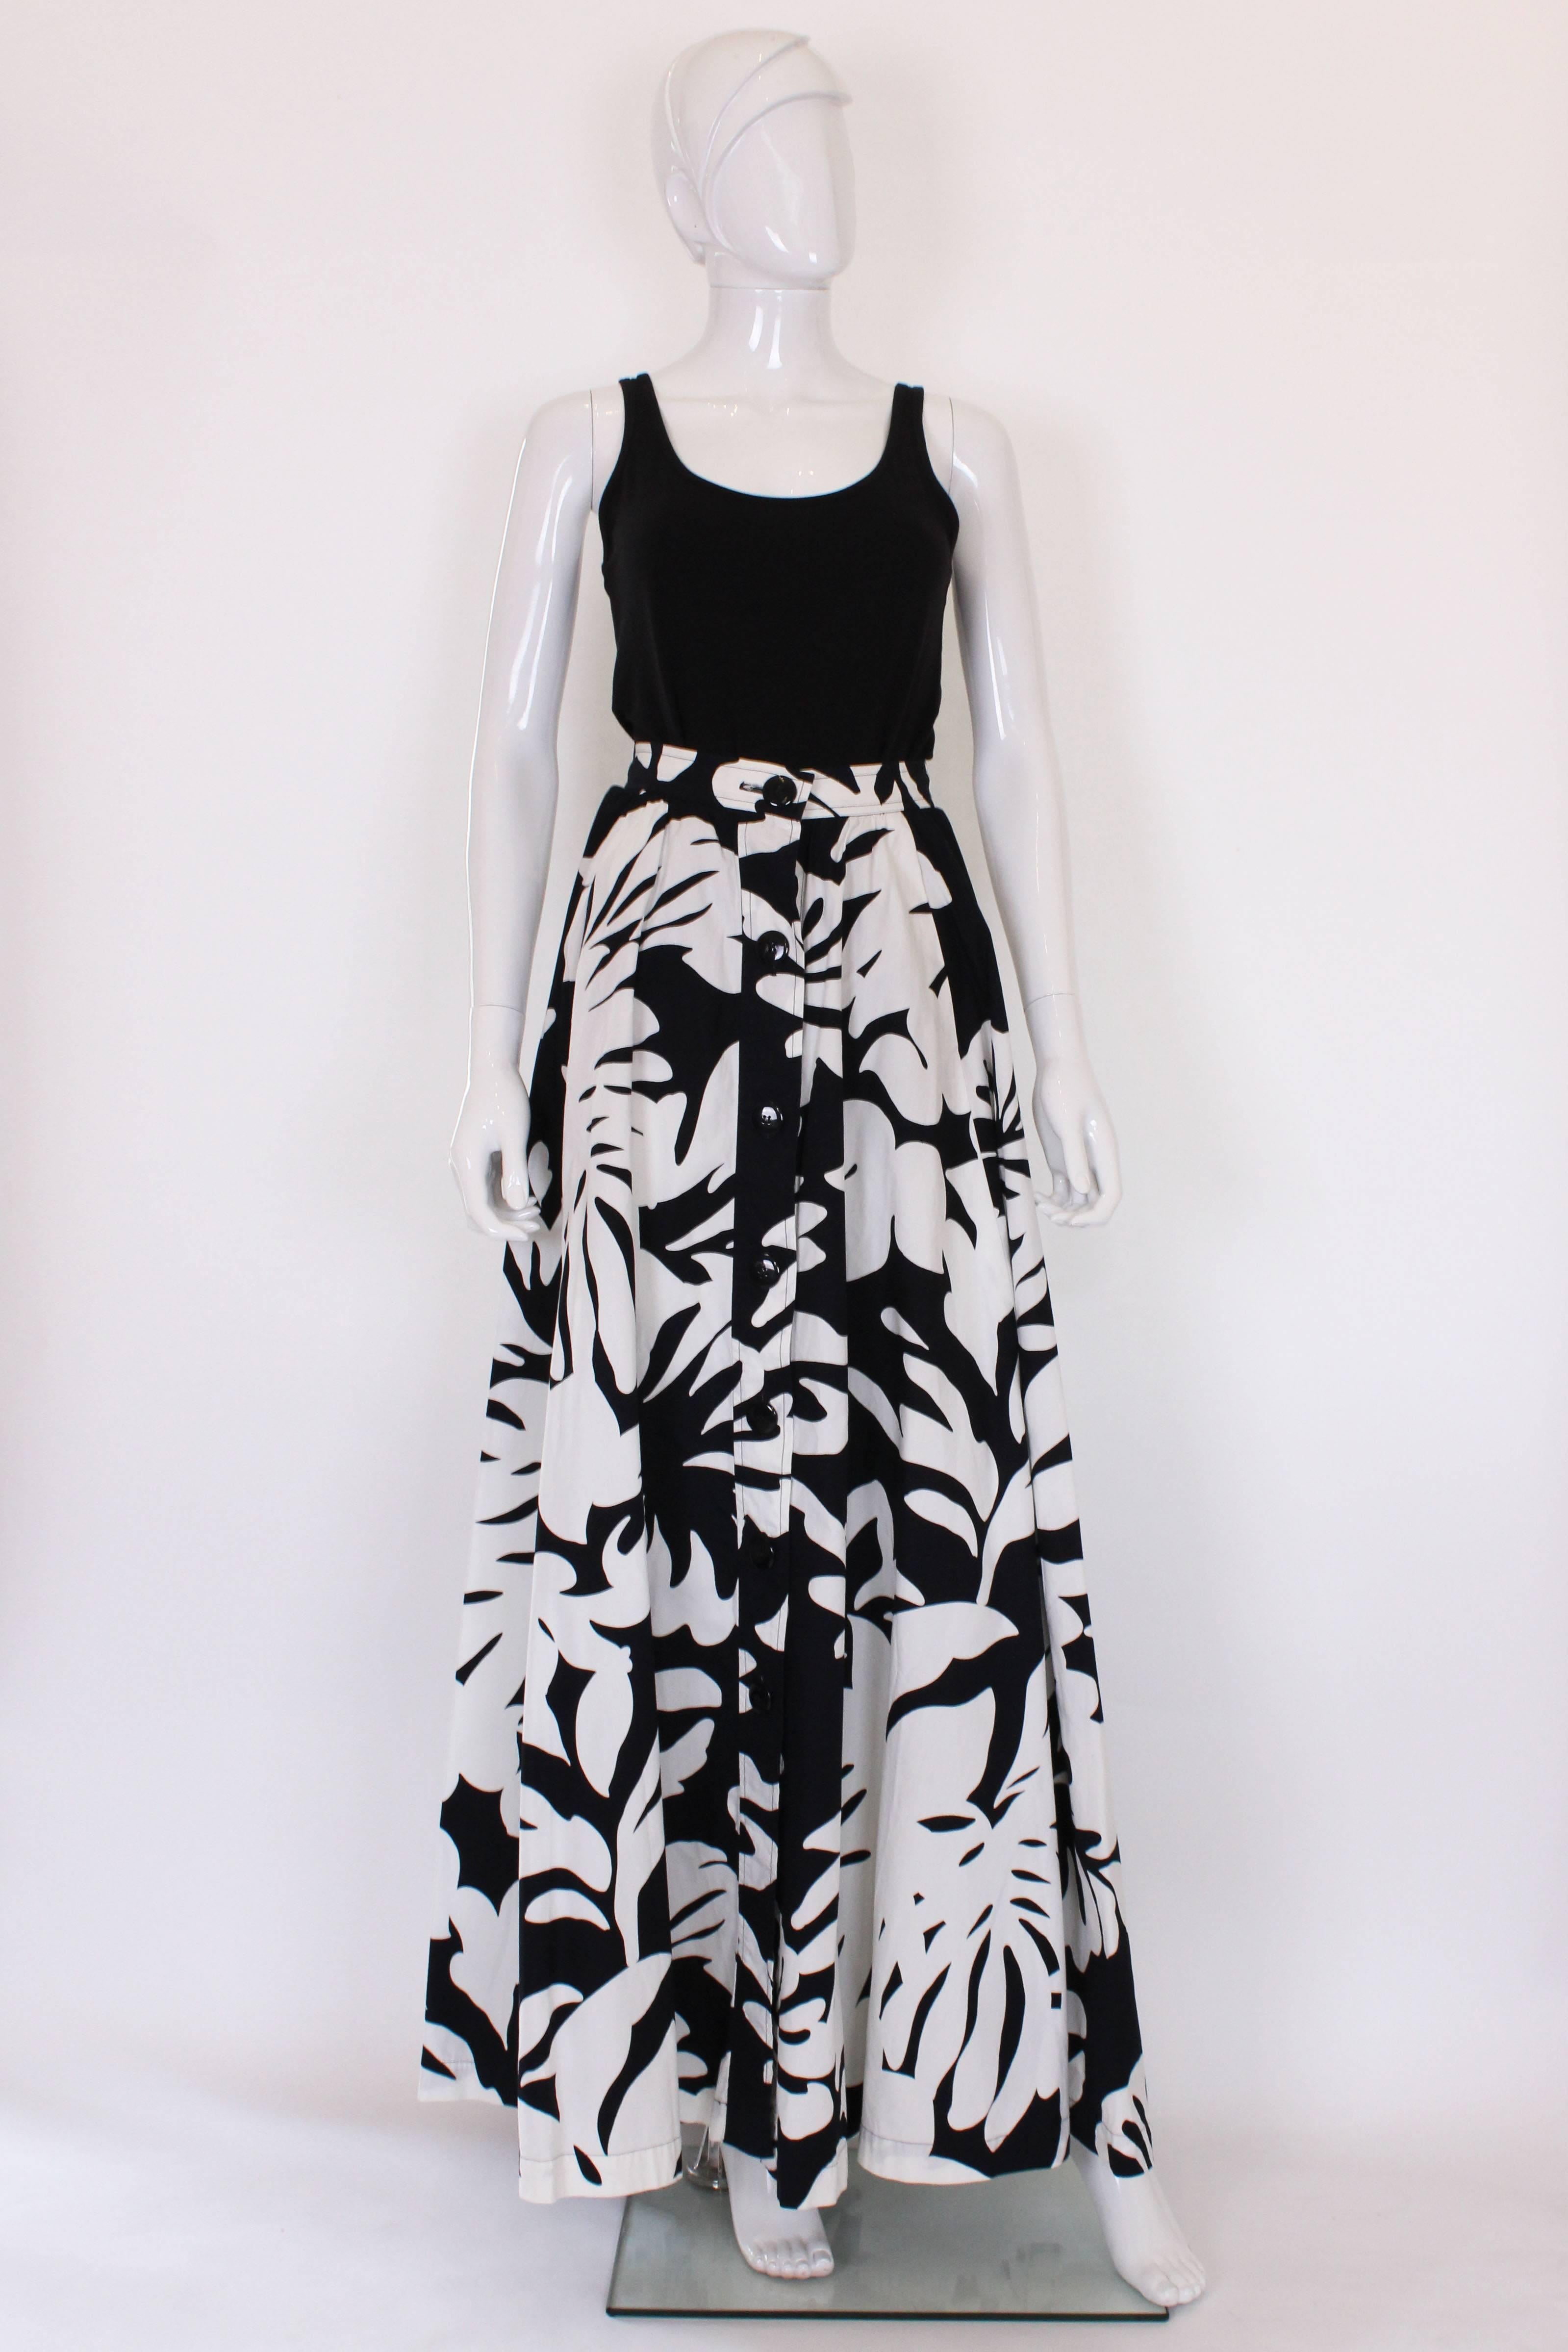 A great skirt from French designer Yves Saint Laurent , Rive Gauche line.
This full length skirt,has a 7 button opening on the front and 2 side pockets.It is a wonderful monochrome black and white print.The skirt is unlined.